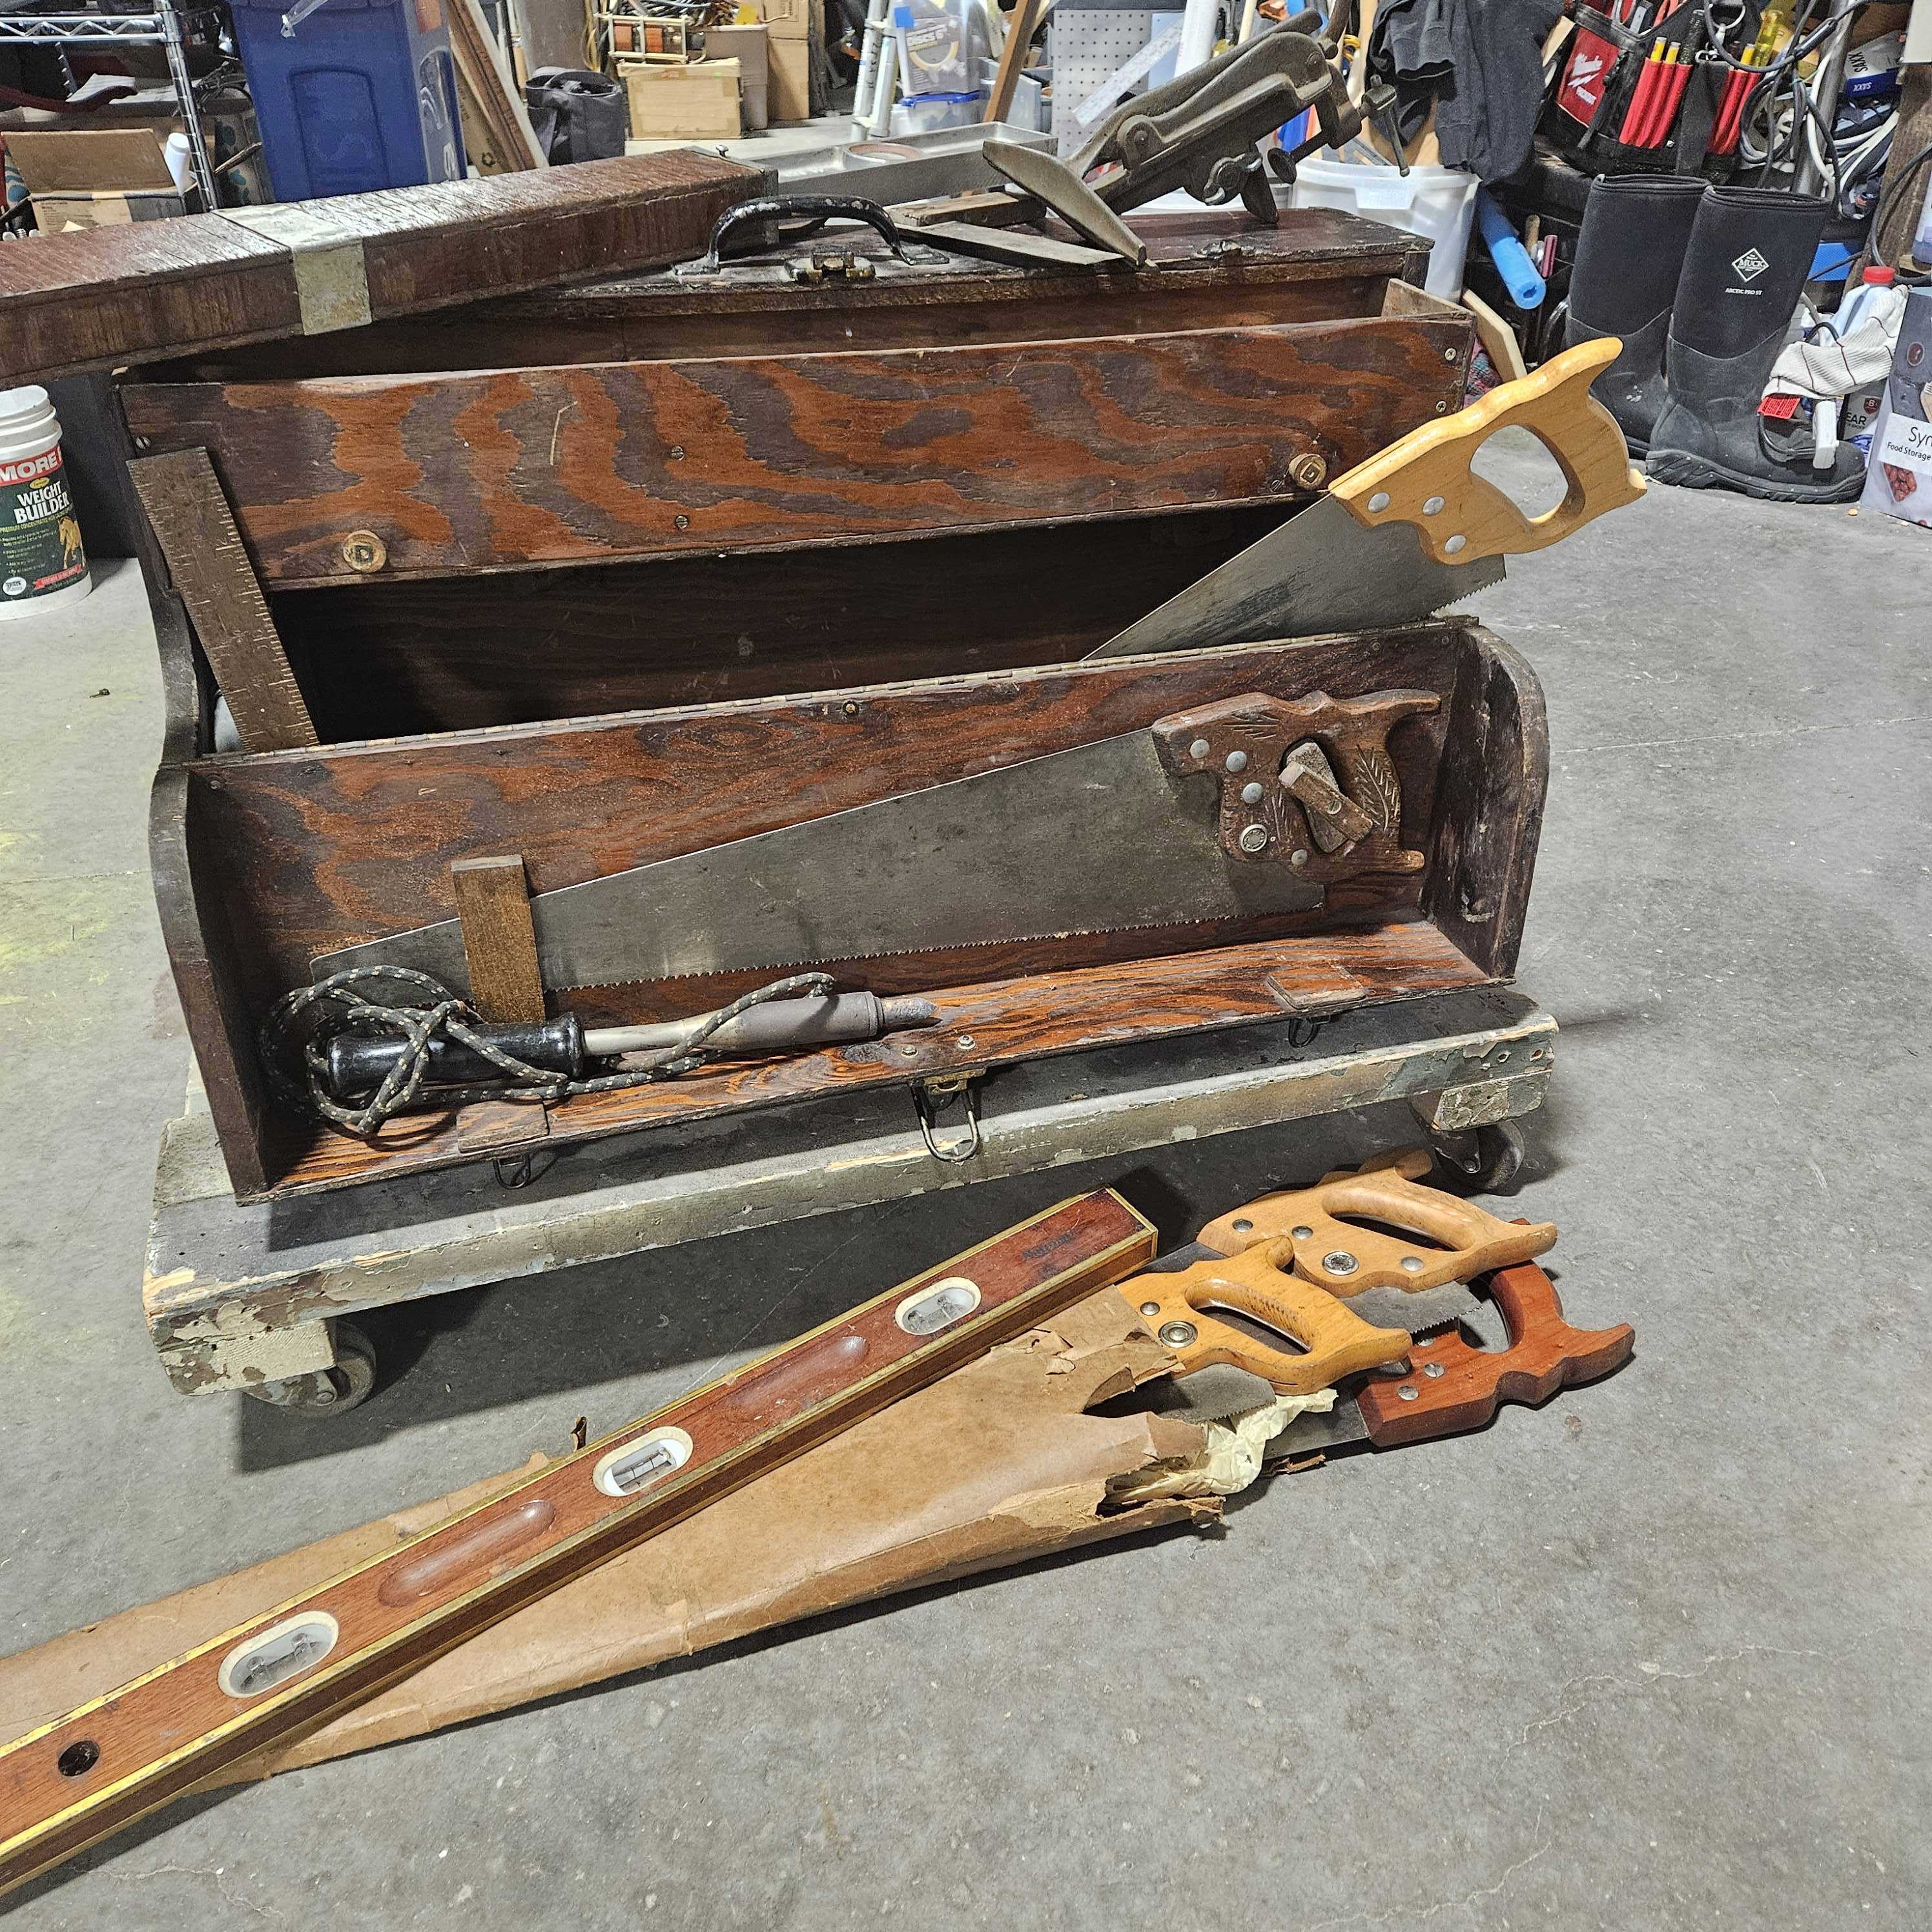 32"x 11"x 18.5" Vintage Hand Made Full of a Variety of Cool Vintage Tools Portable Tool Box